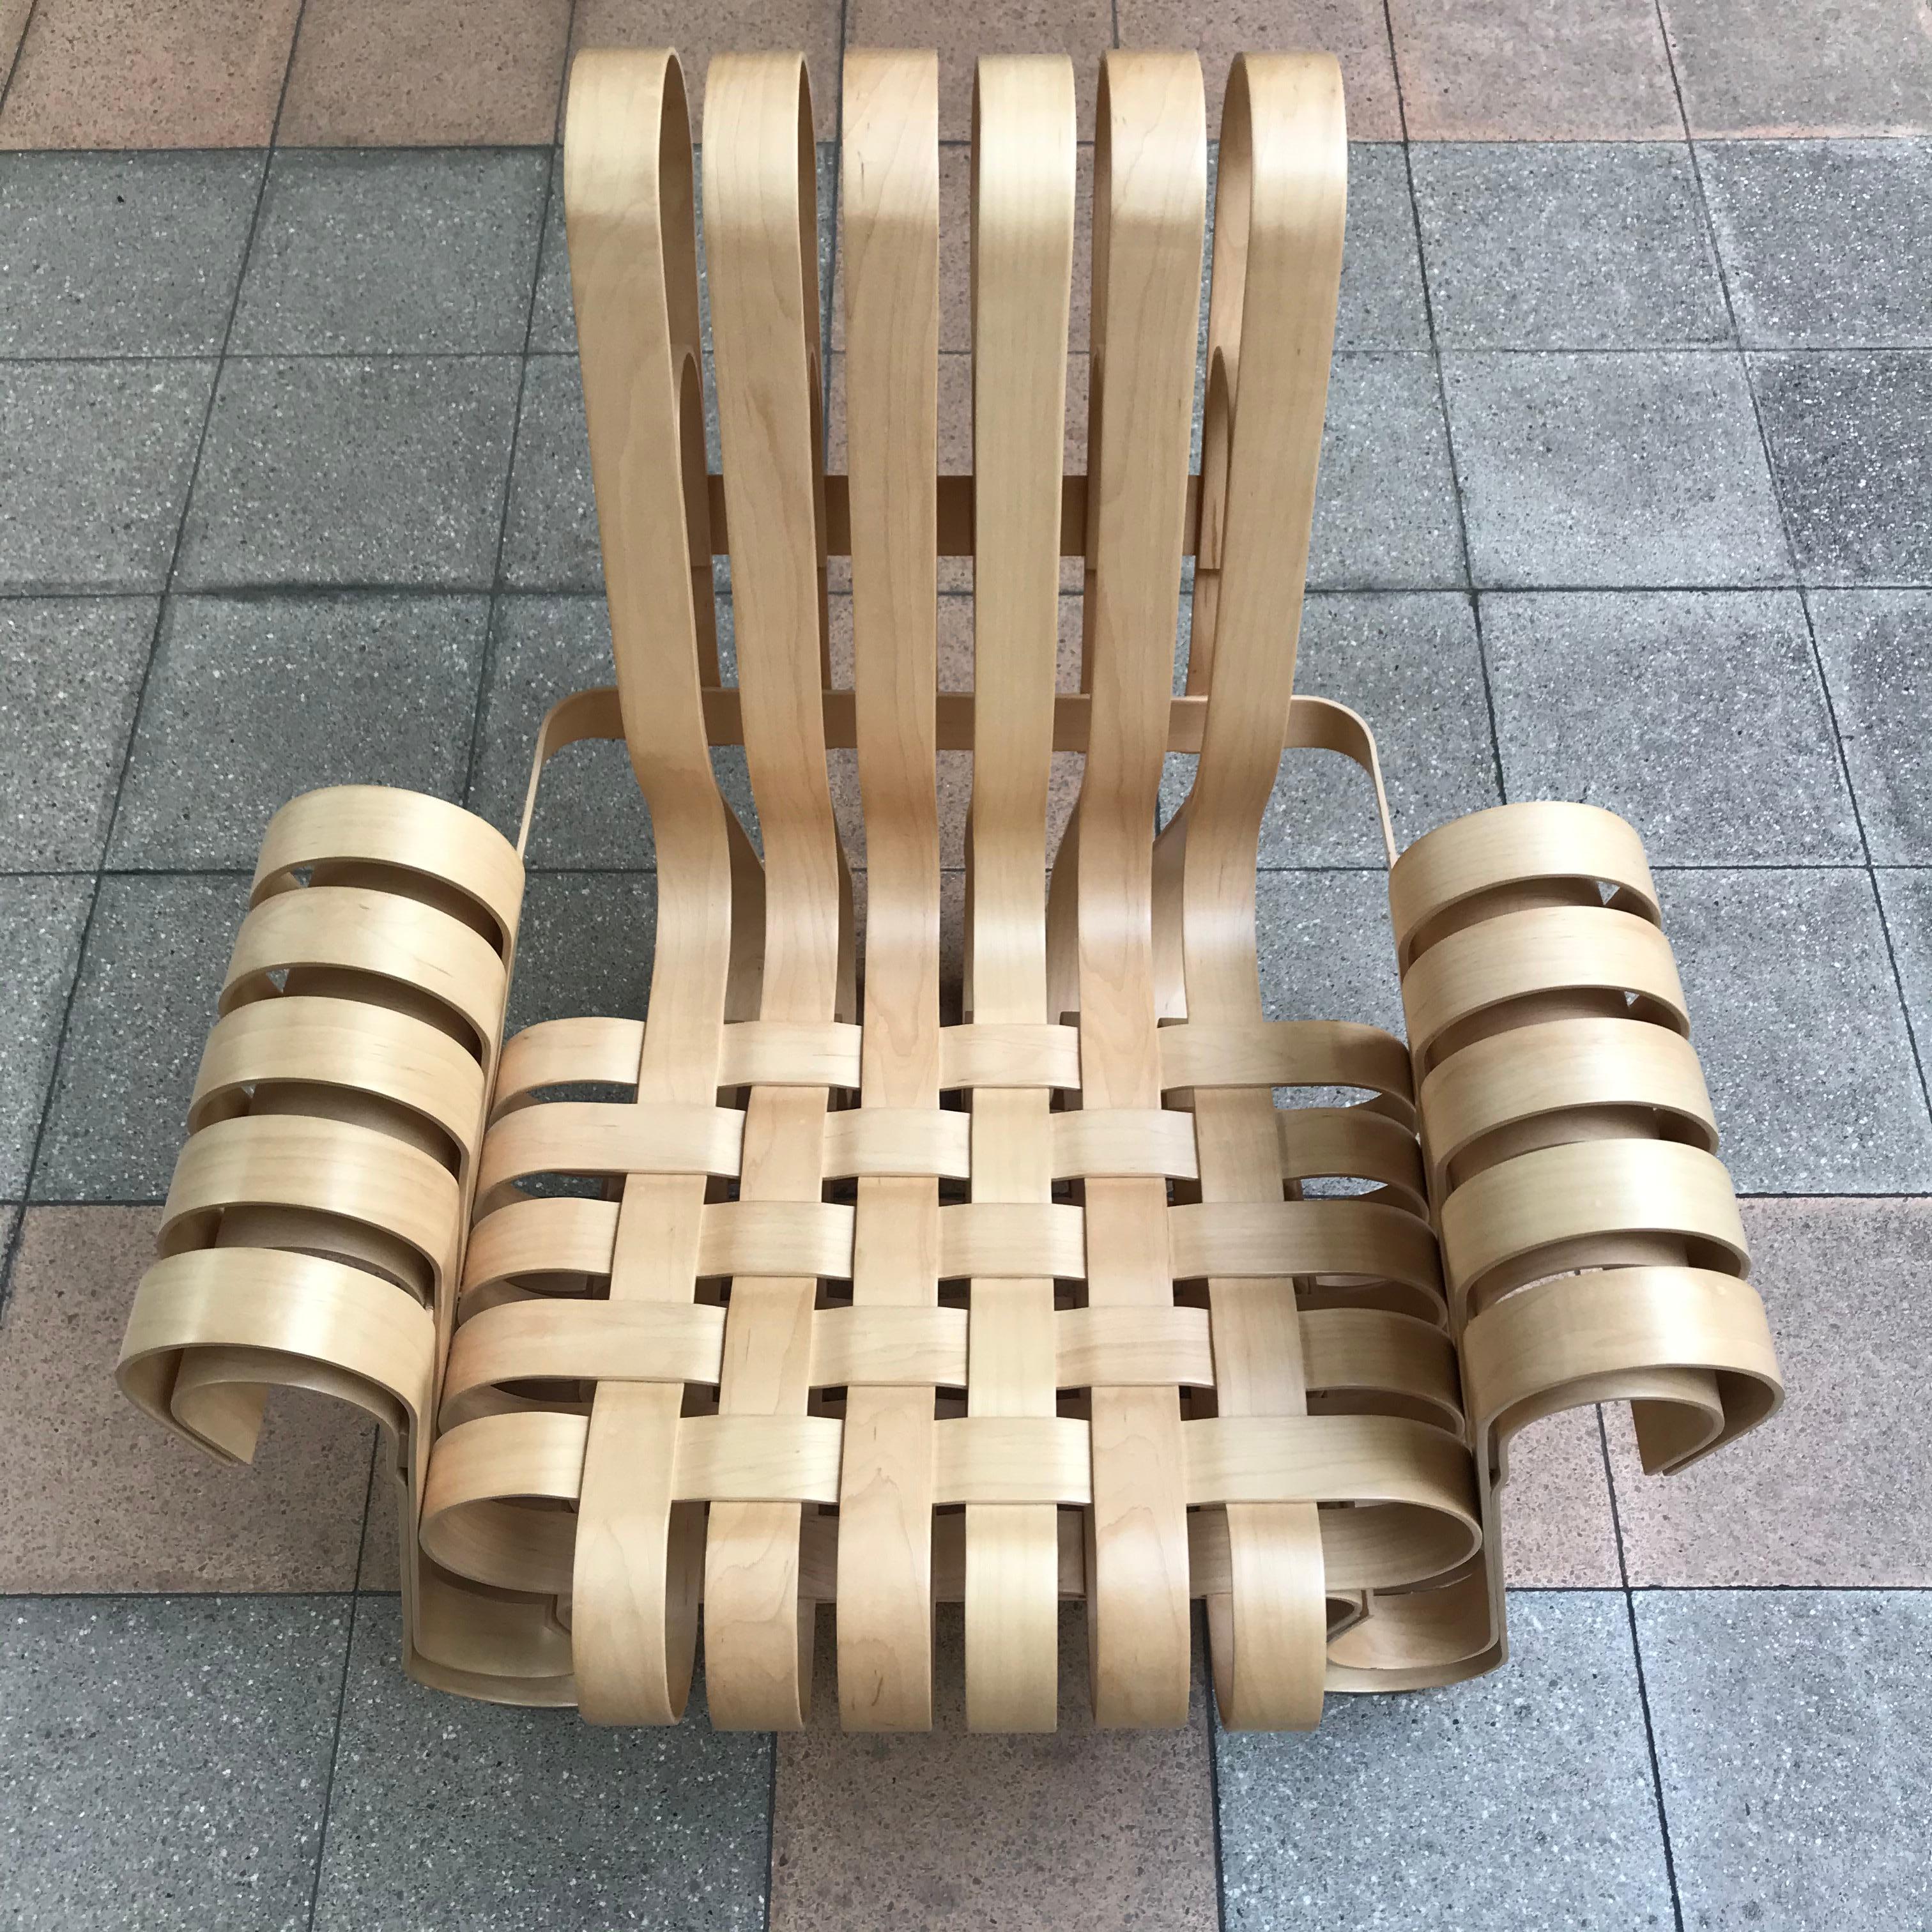 Exceptional chair
Knoll International American Maple Limited Edition
81x 83 x 80 cms
perfect condition new
circa 1990
9900 Euros.
 